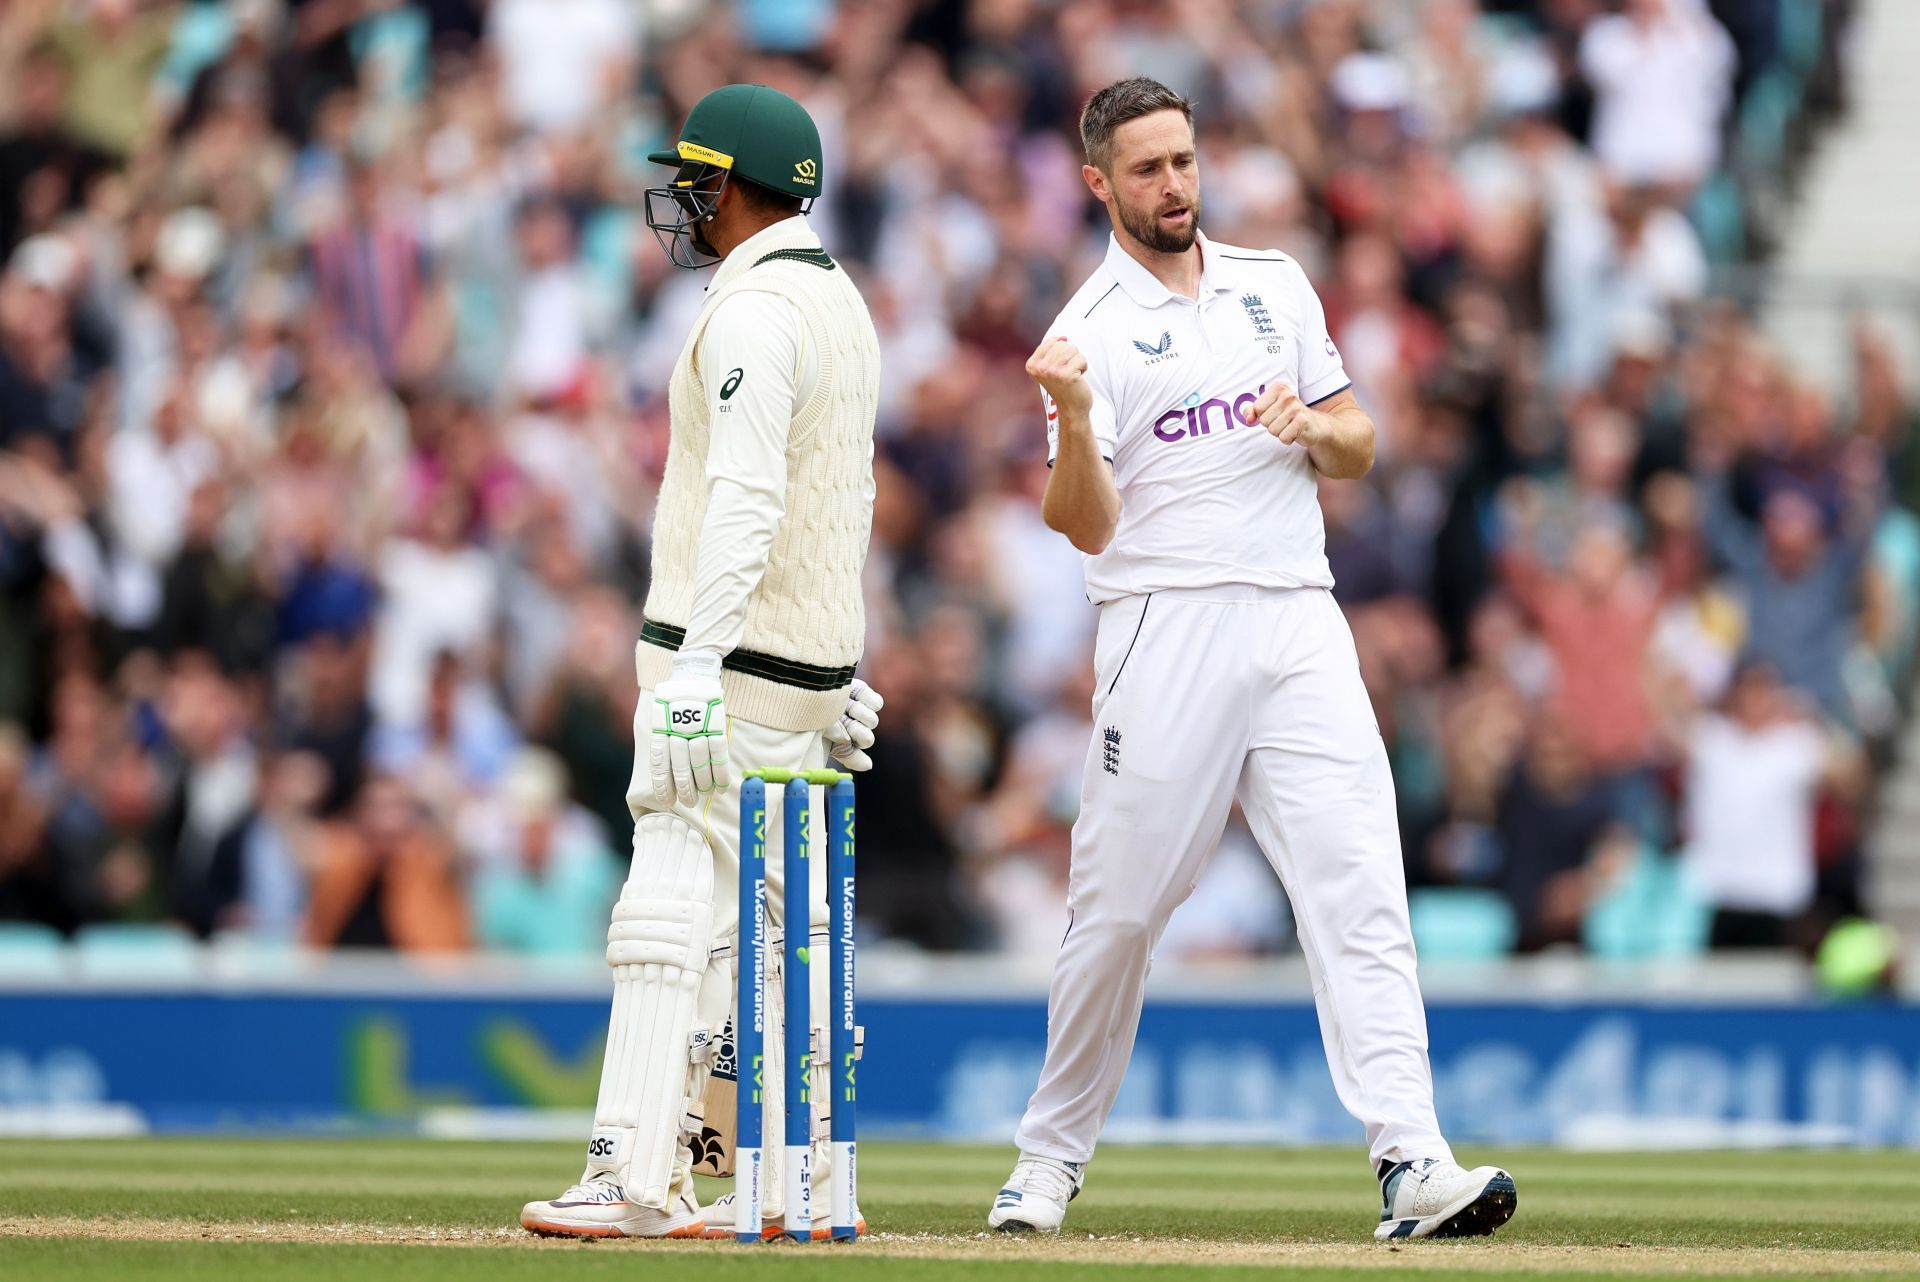 England v Australia - LV= Insurance Ashes 5th Test Match: Day Five (Image: Getty)